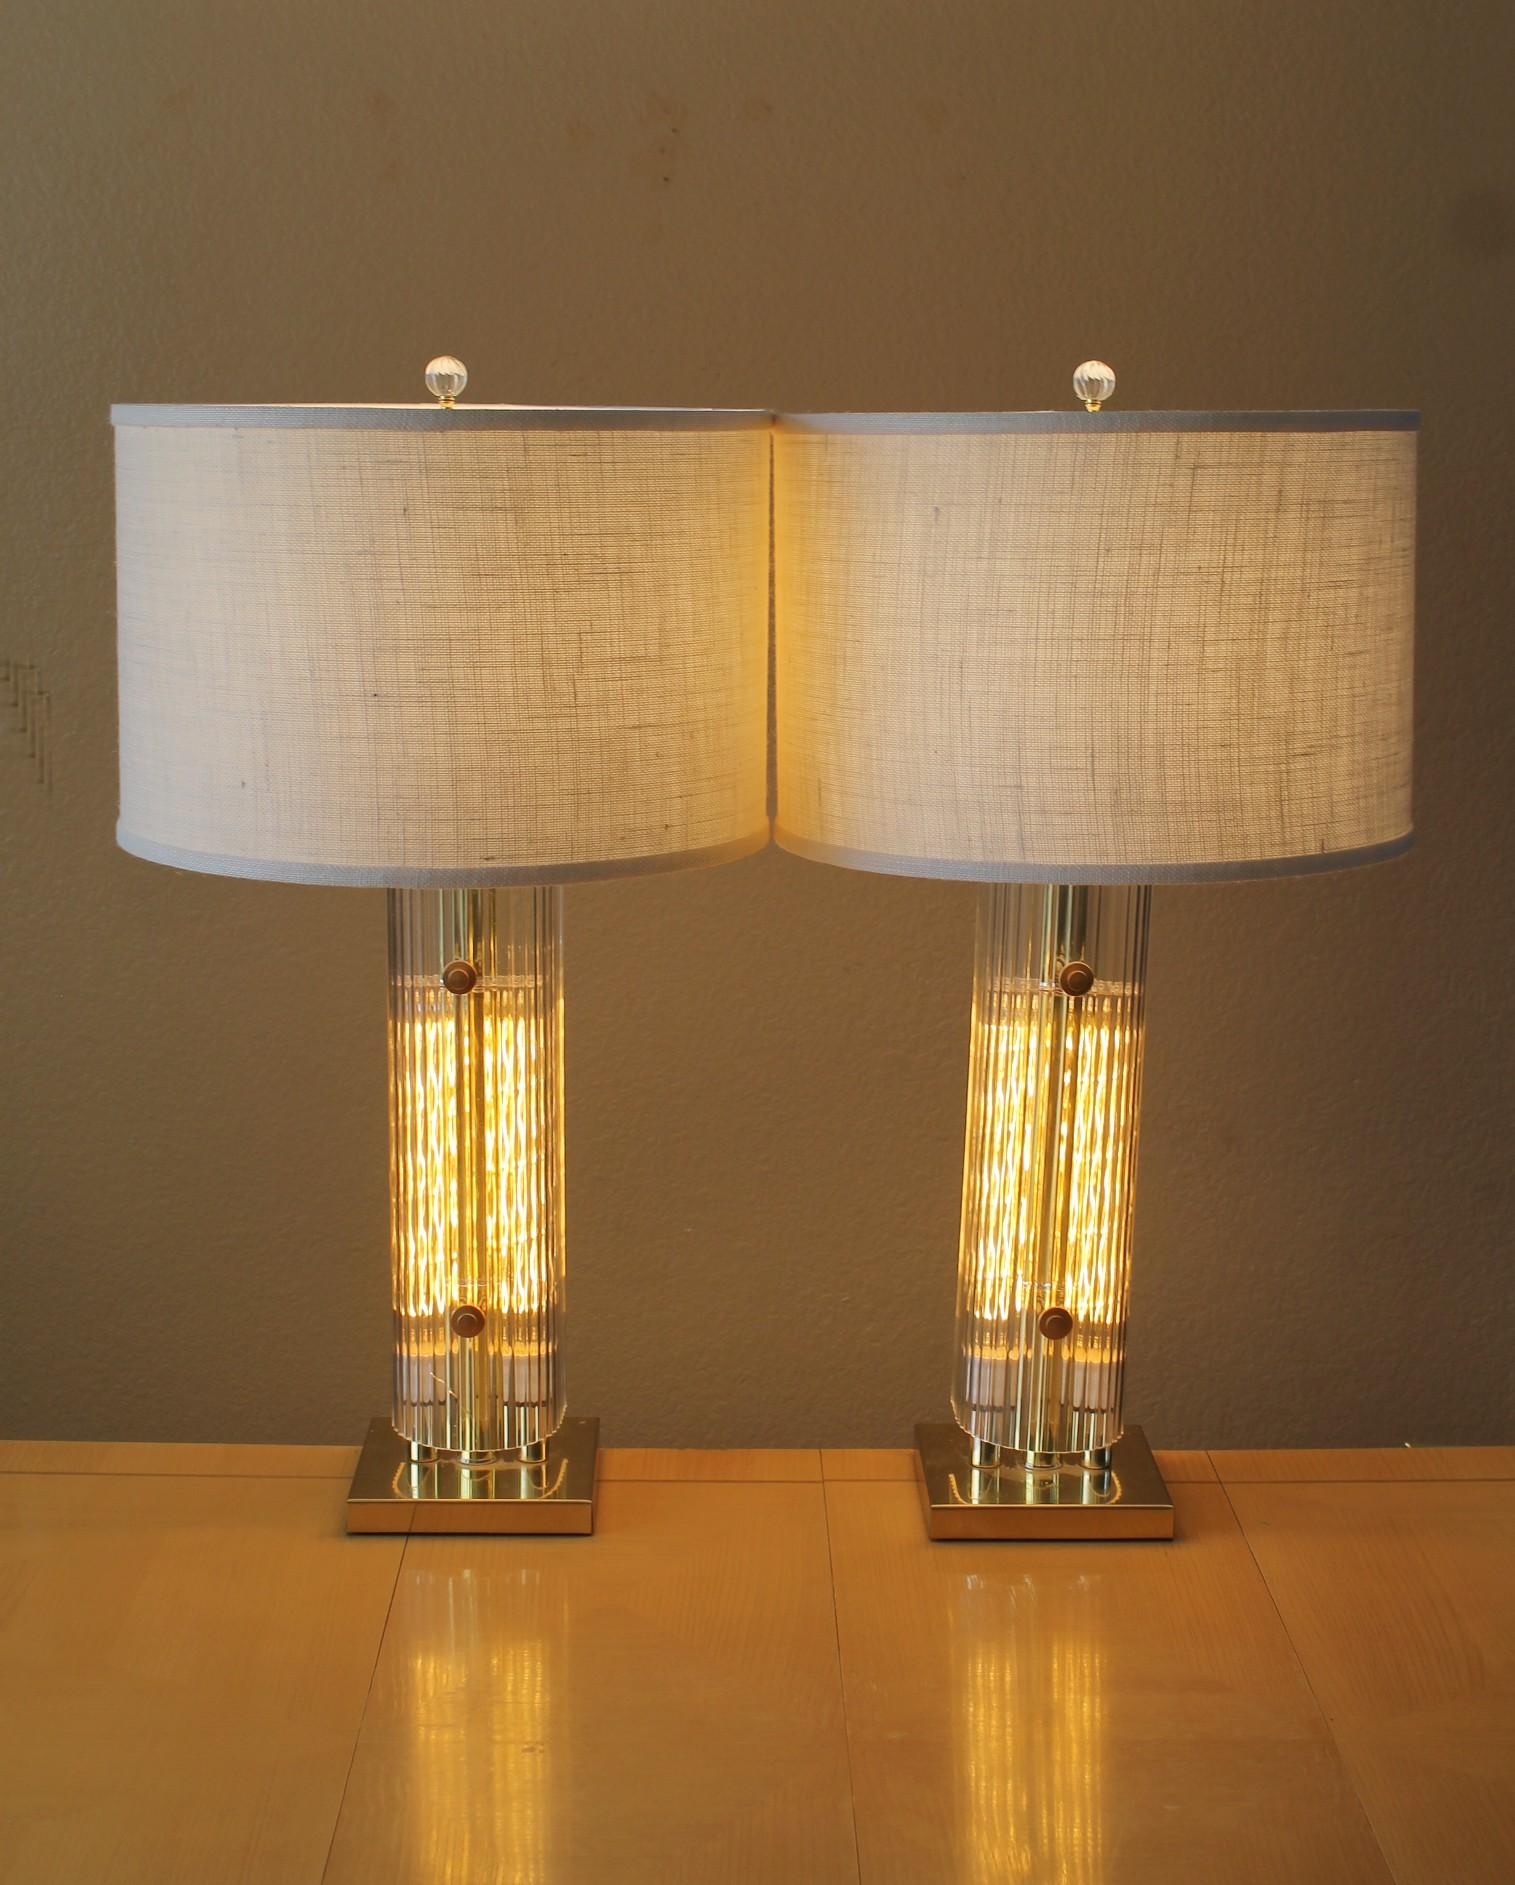 ART DECO LAMP SENSATIONS!

PAIR LUCITE AND BRASS
DECORATIVE 3-WAY
TABLE LAMPS
 
In the Manner of Tommi Parzinger

Showstoppers!

Dimensions:  33